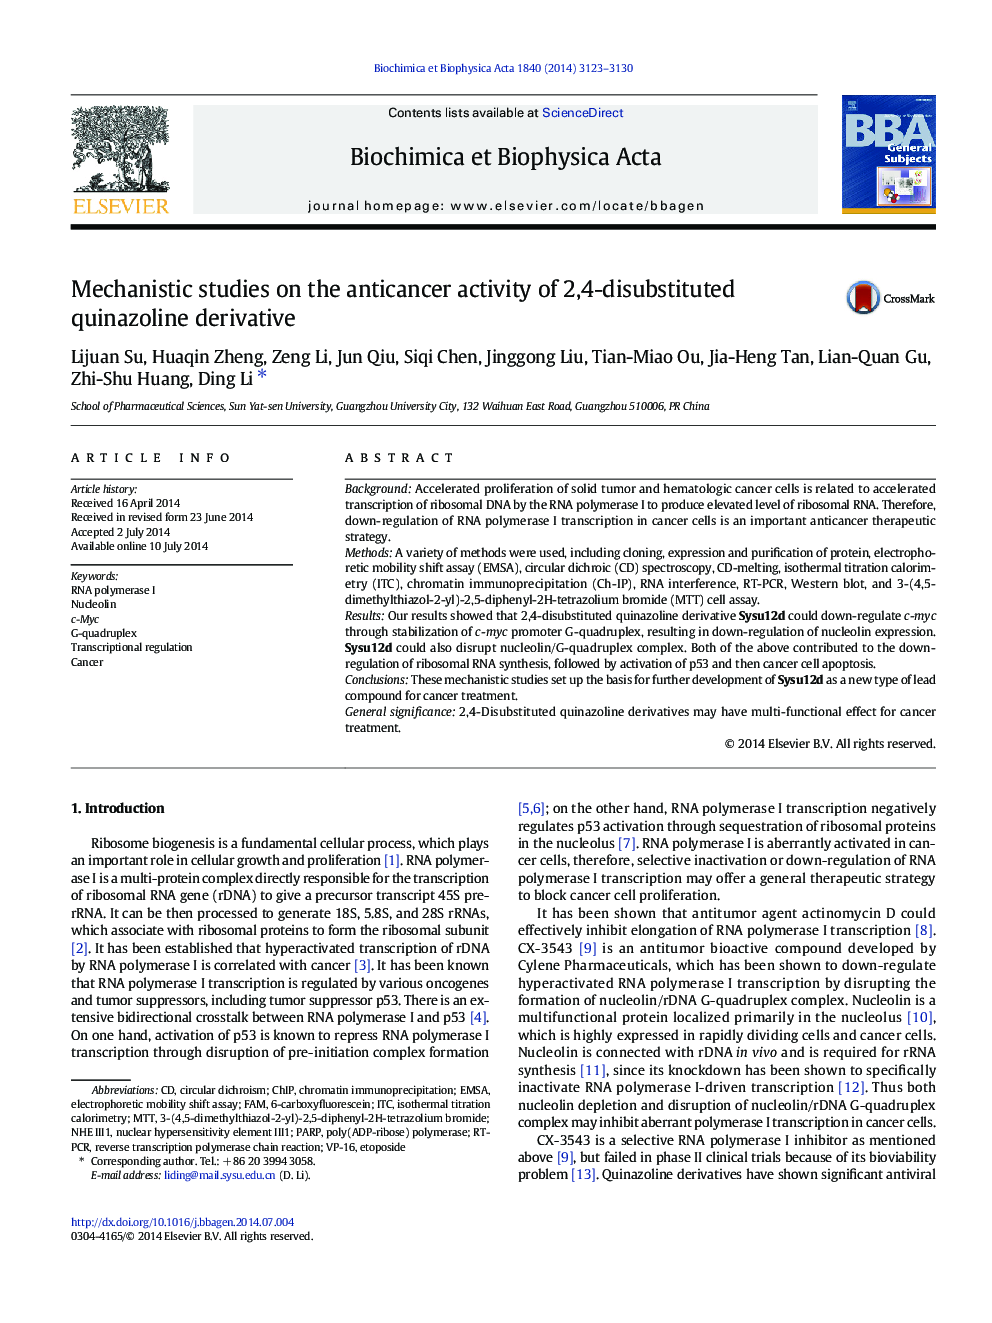 Mechanistic studies on the anticancer activity of 2,4-disubstituted quinazoline derivative